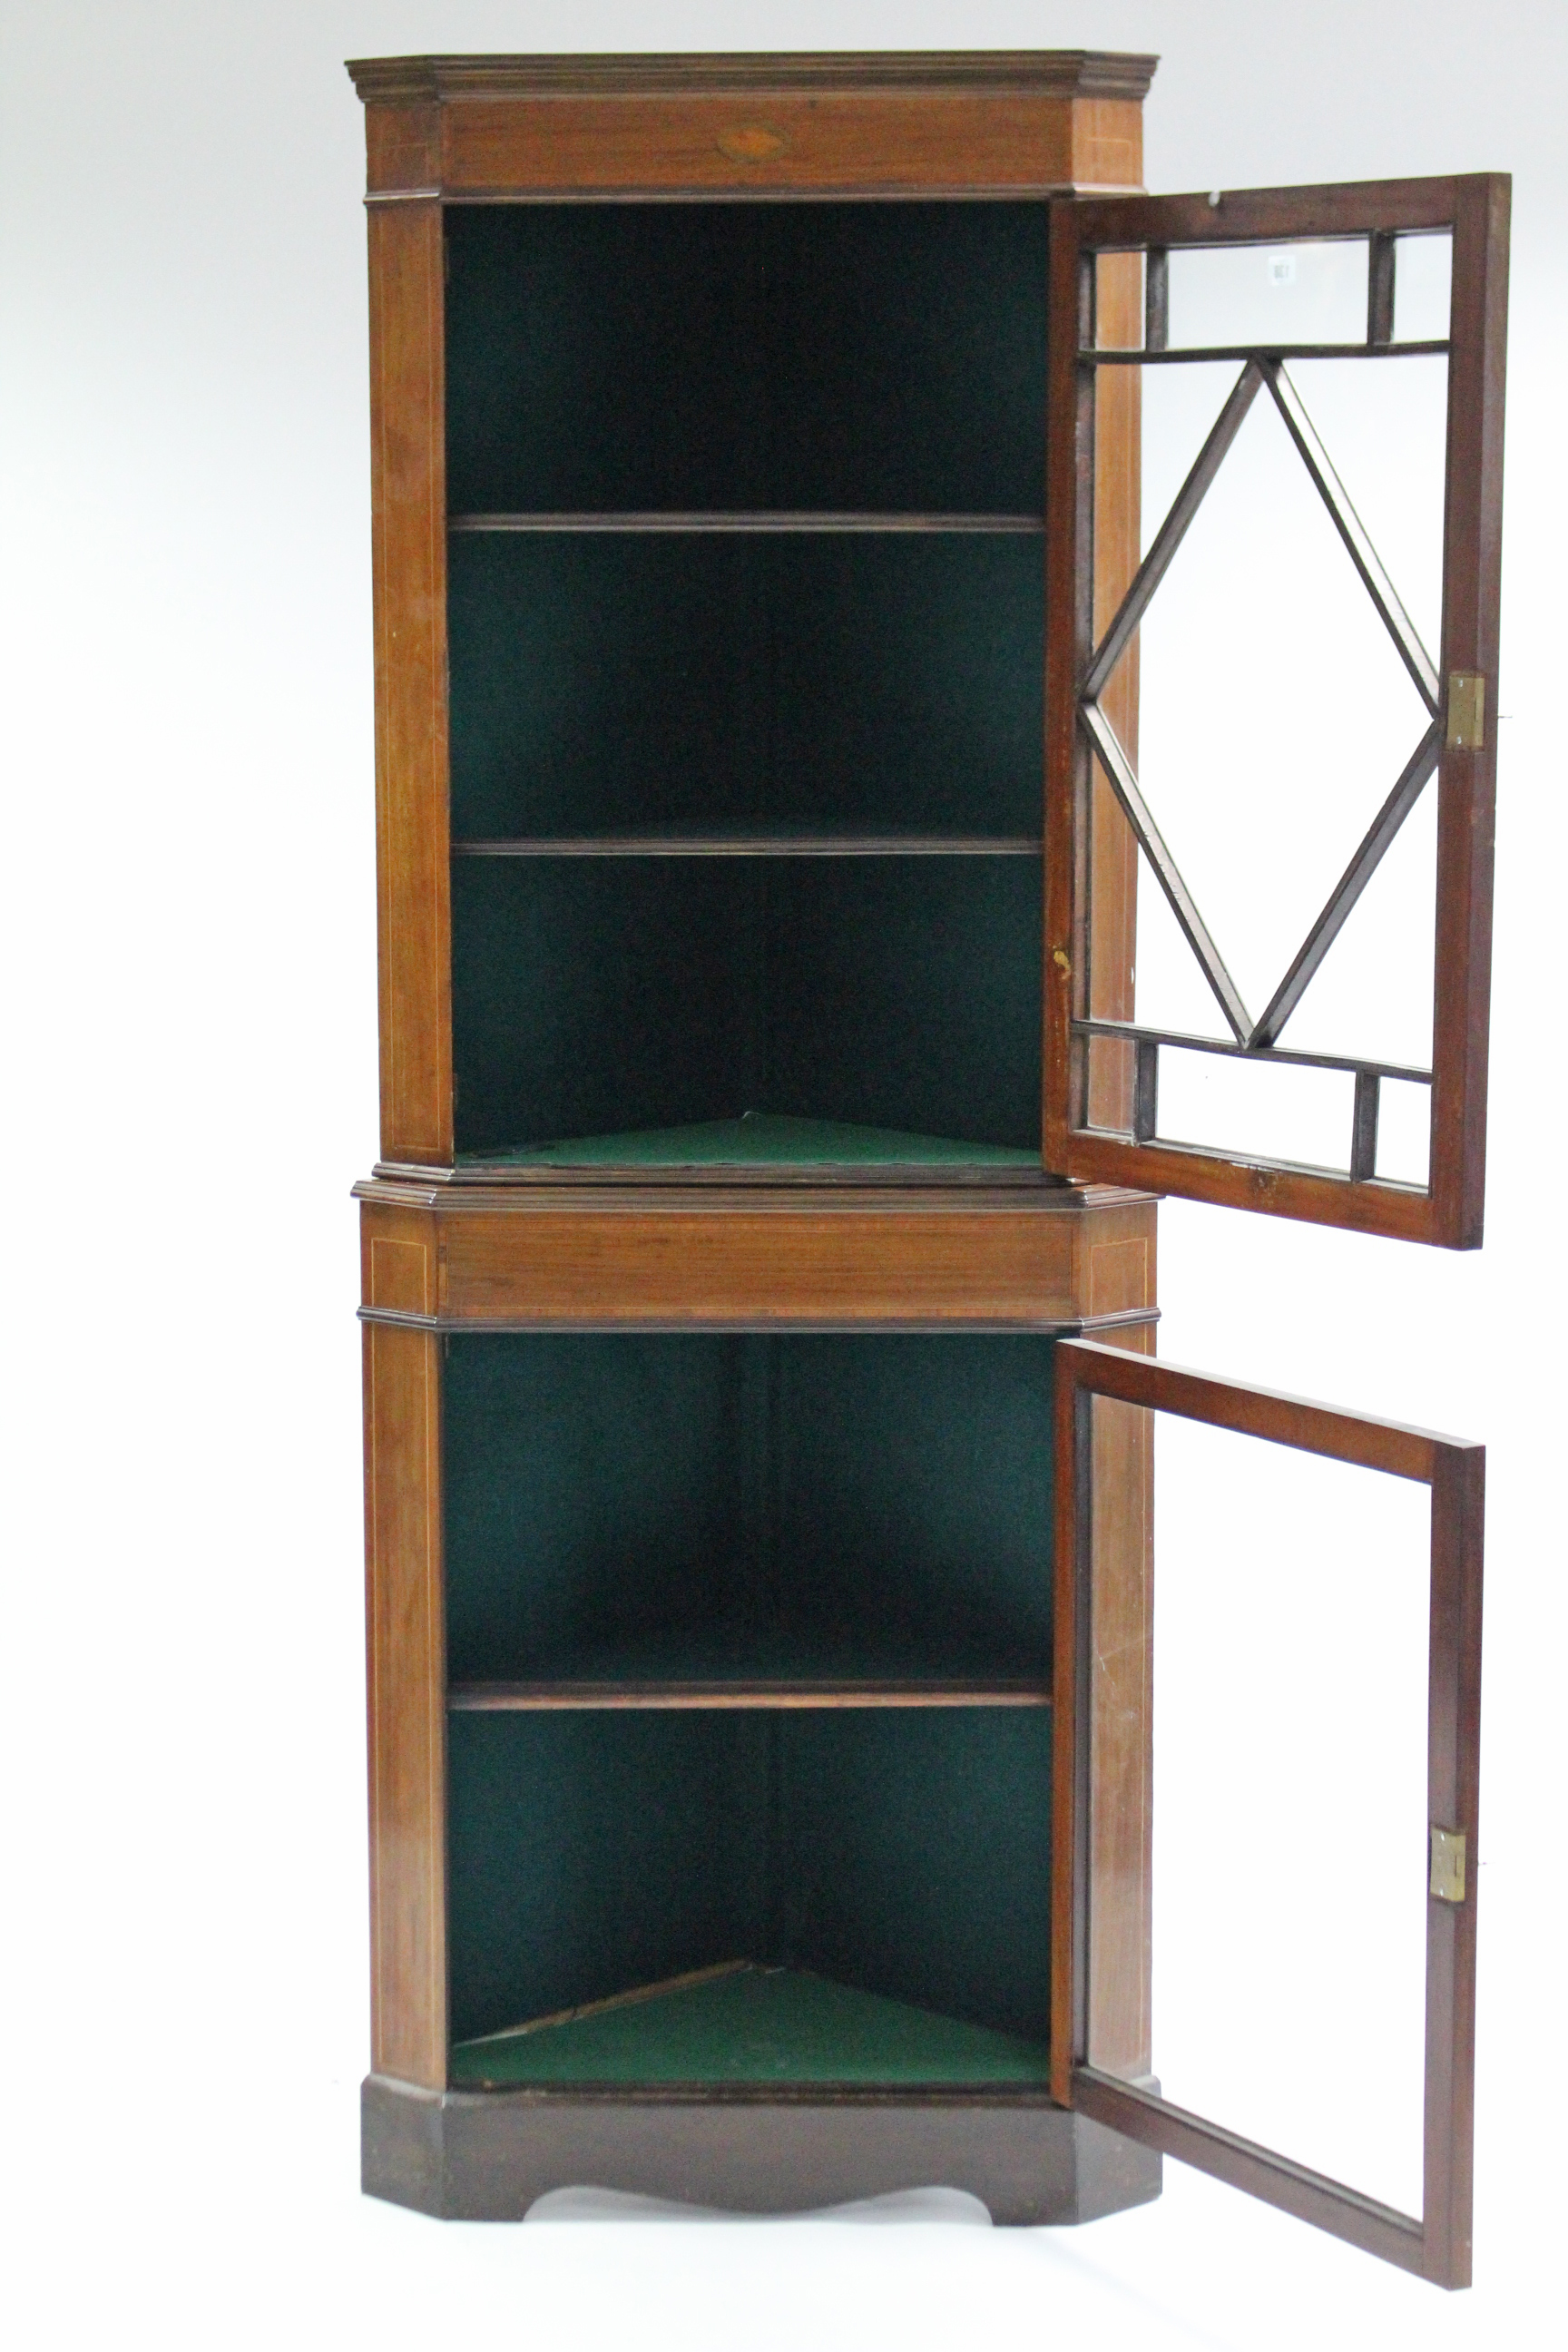 A 19th century inlaid-mahogany tall standing corner cabinet, fitted three shelves enclosed by pair - Image 2 of 2